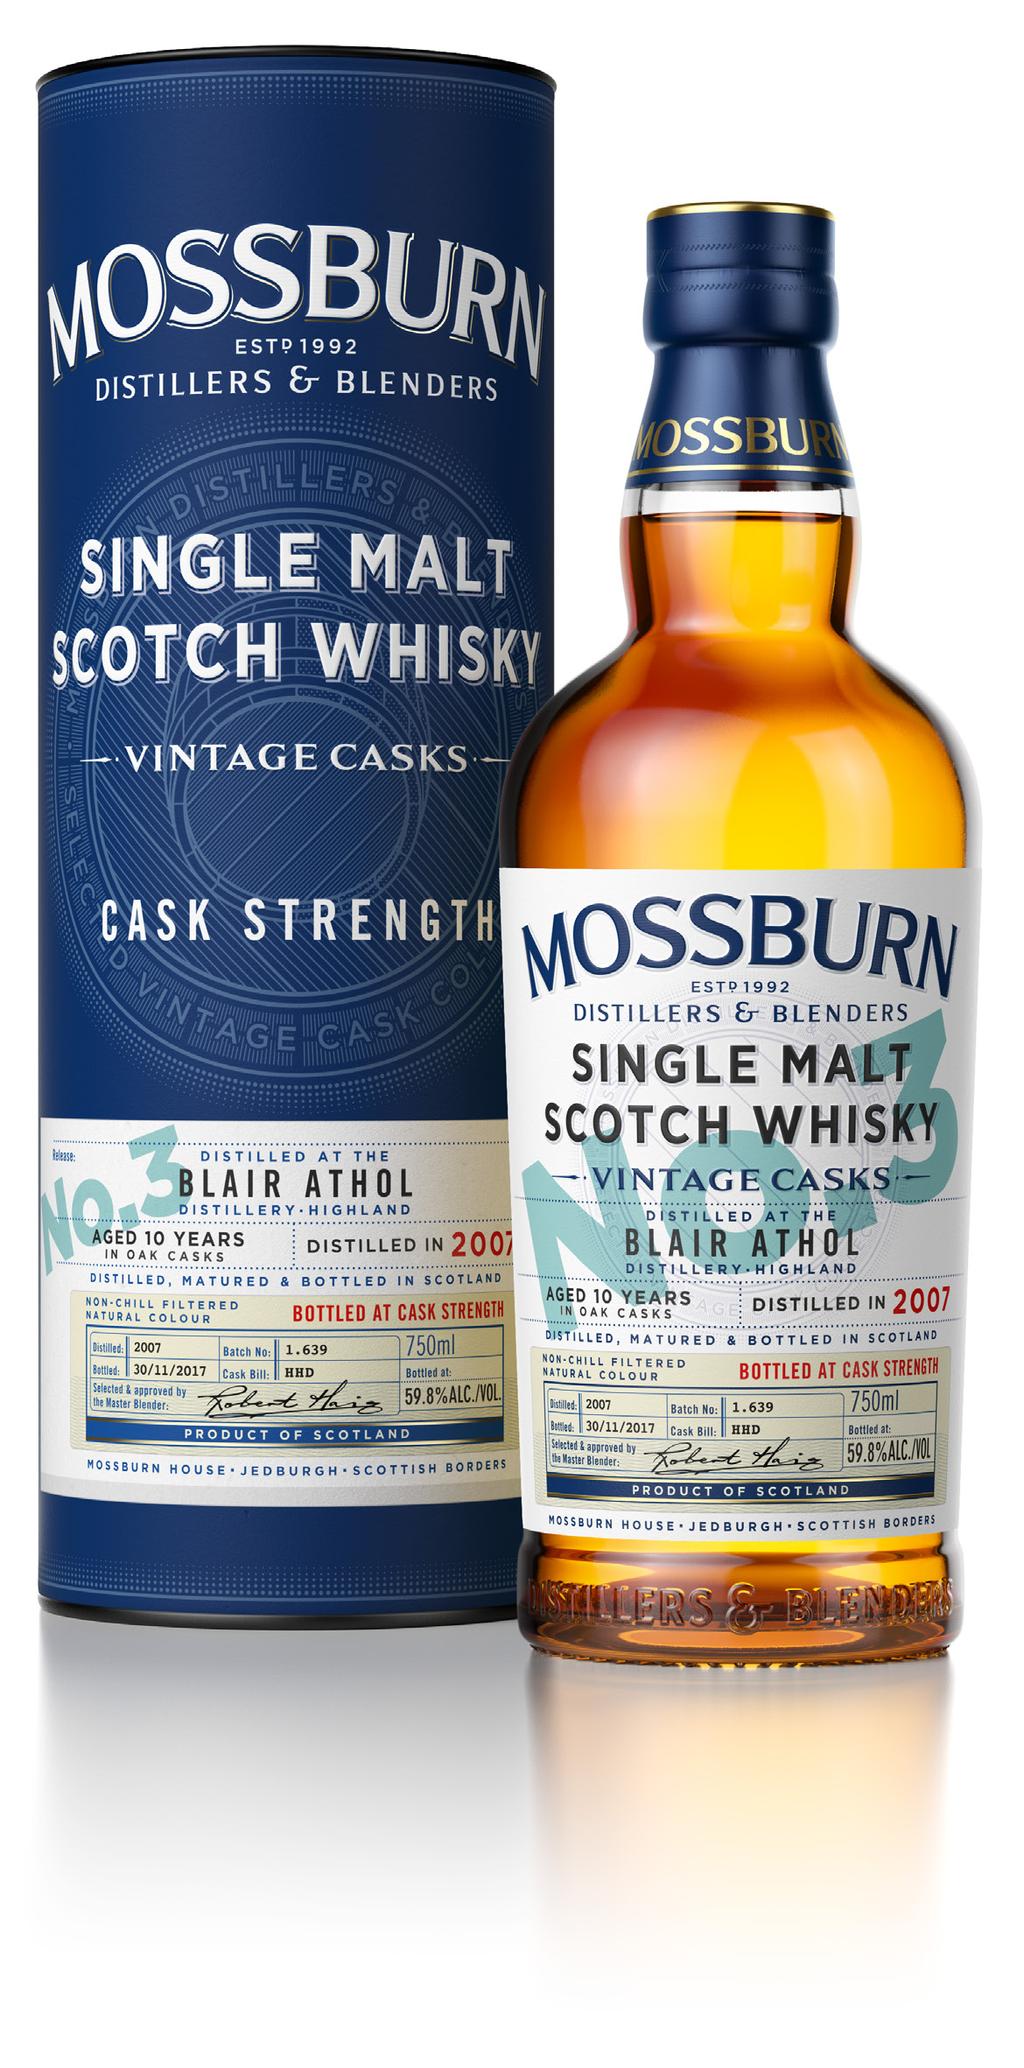 The Mossburn Vintage Casks range are a collection of Single Malt ABV AGED 10 YEARS IN CASK Highland Single Malt Scotch Whisky 59.